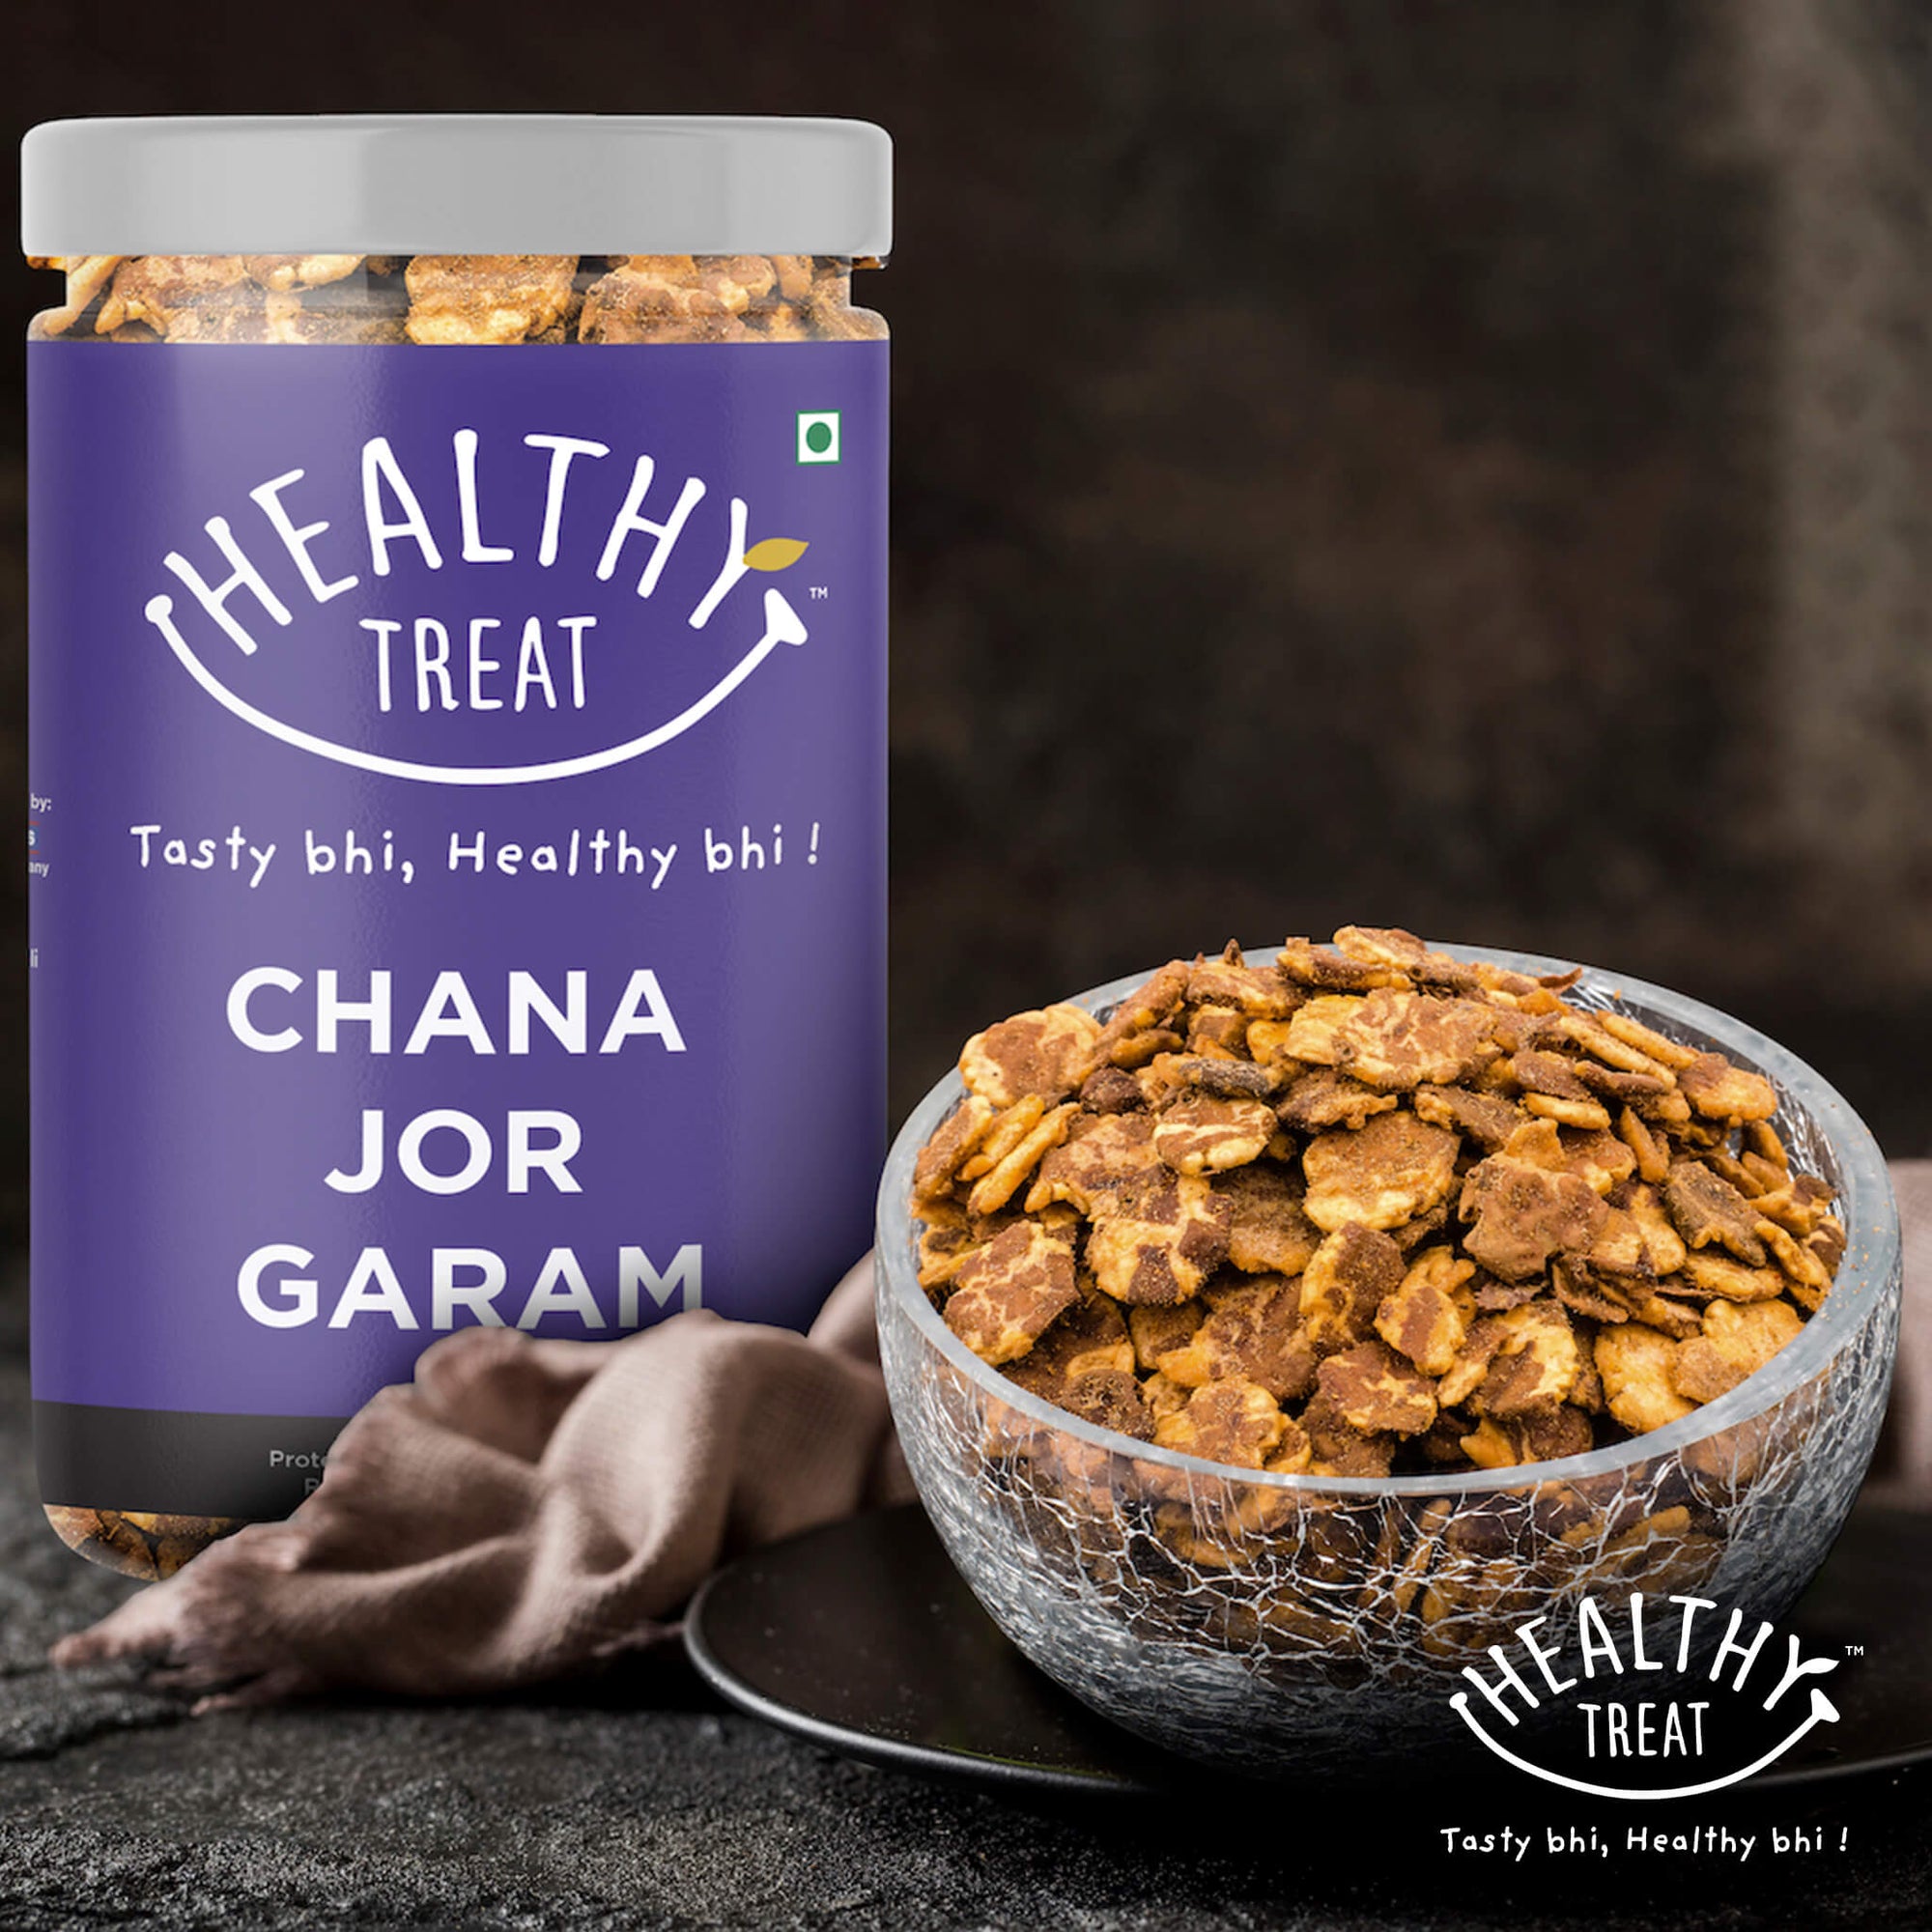 roasted chana jor garam, flattened chickpeas, by healthy treat, crunchy and protein rich